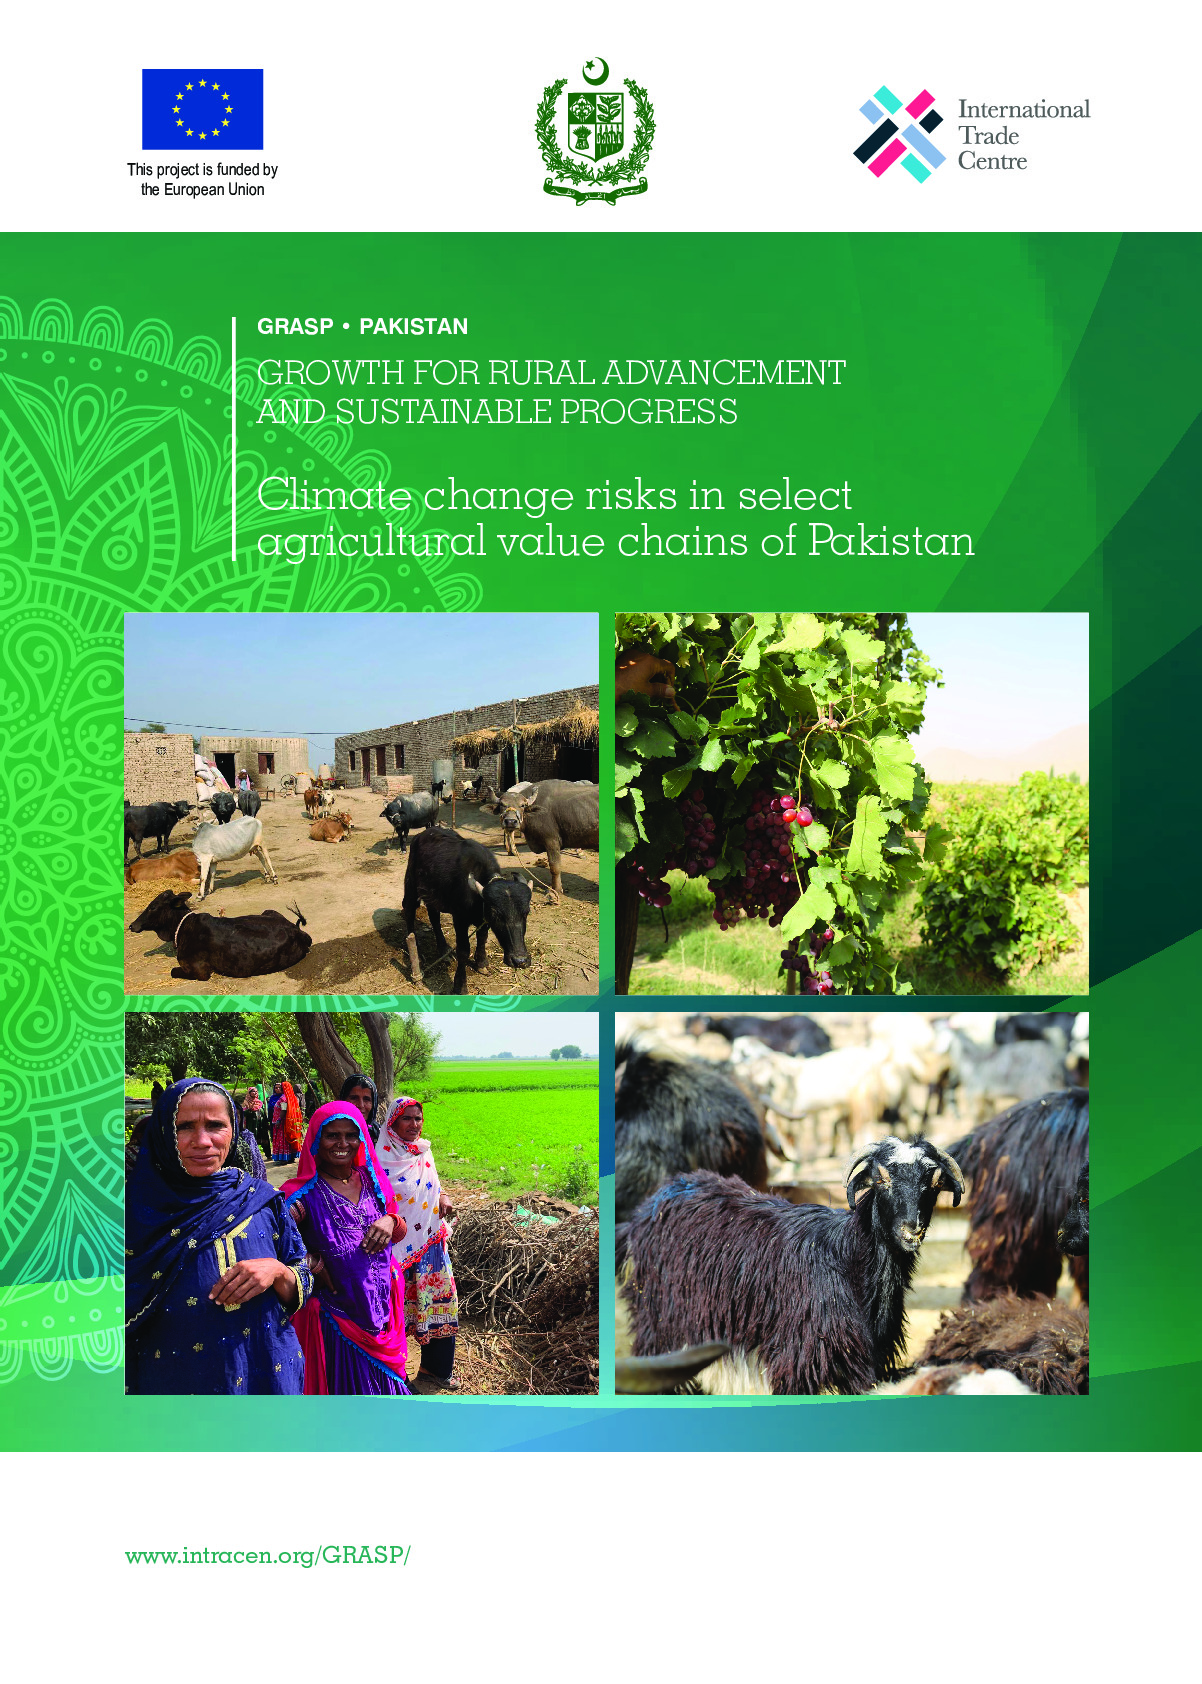 grasp-4-climate_change_risks_in_select_agricultural_value_chains_of_pakistan-2020_1_2